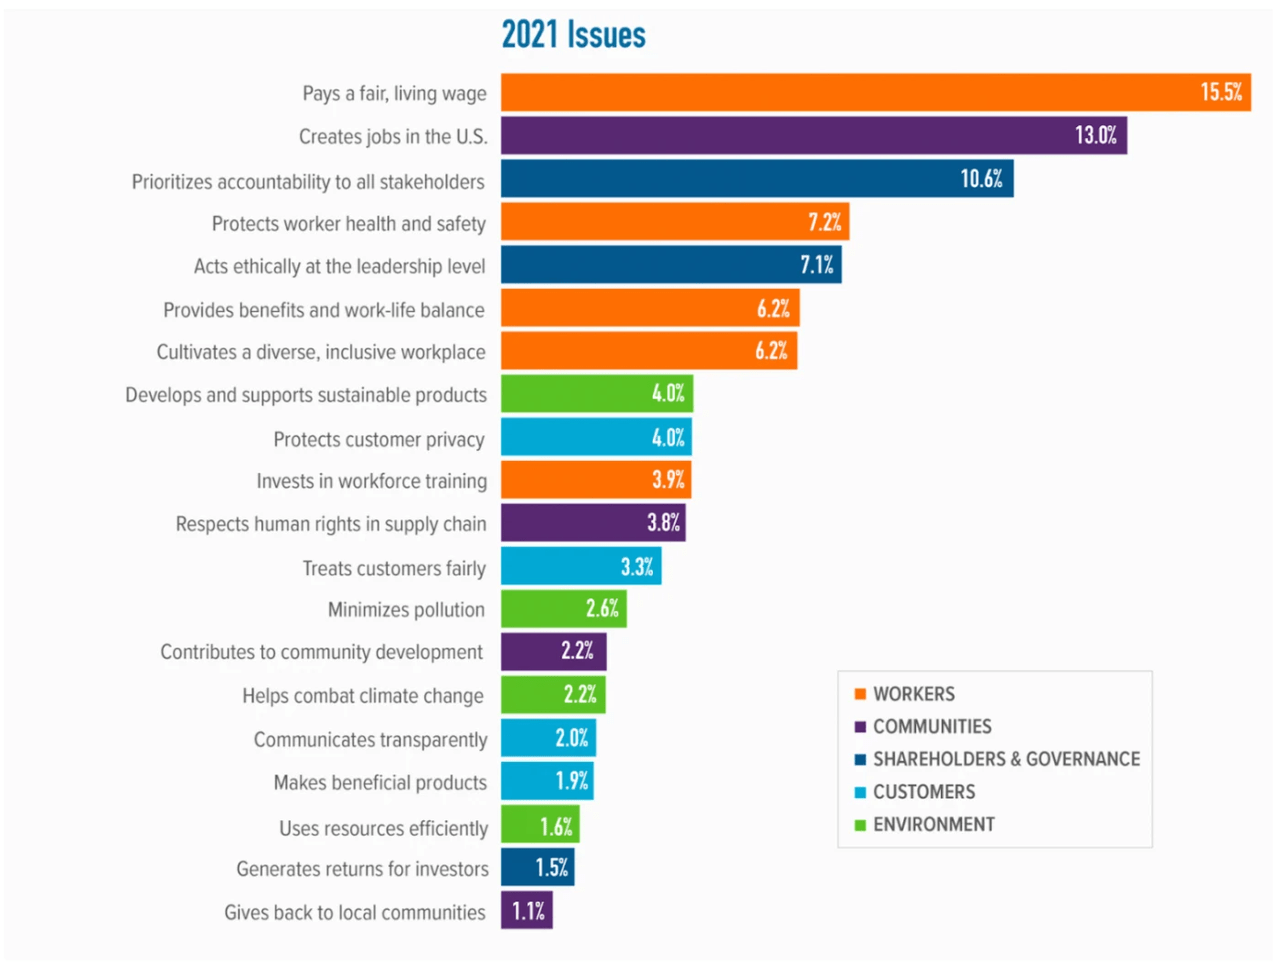 JUST Capital's 2021 Classification of Issues with relative Ranking Weights